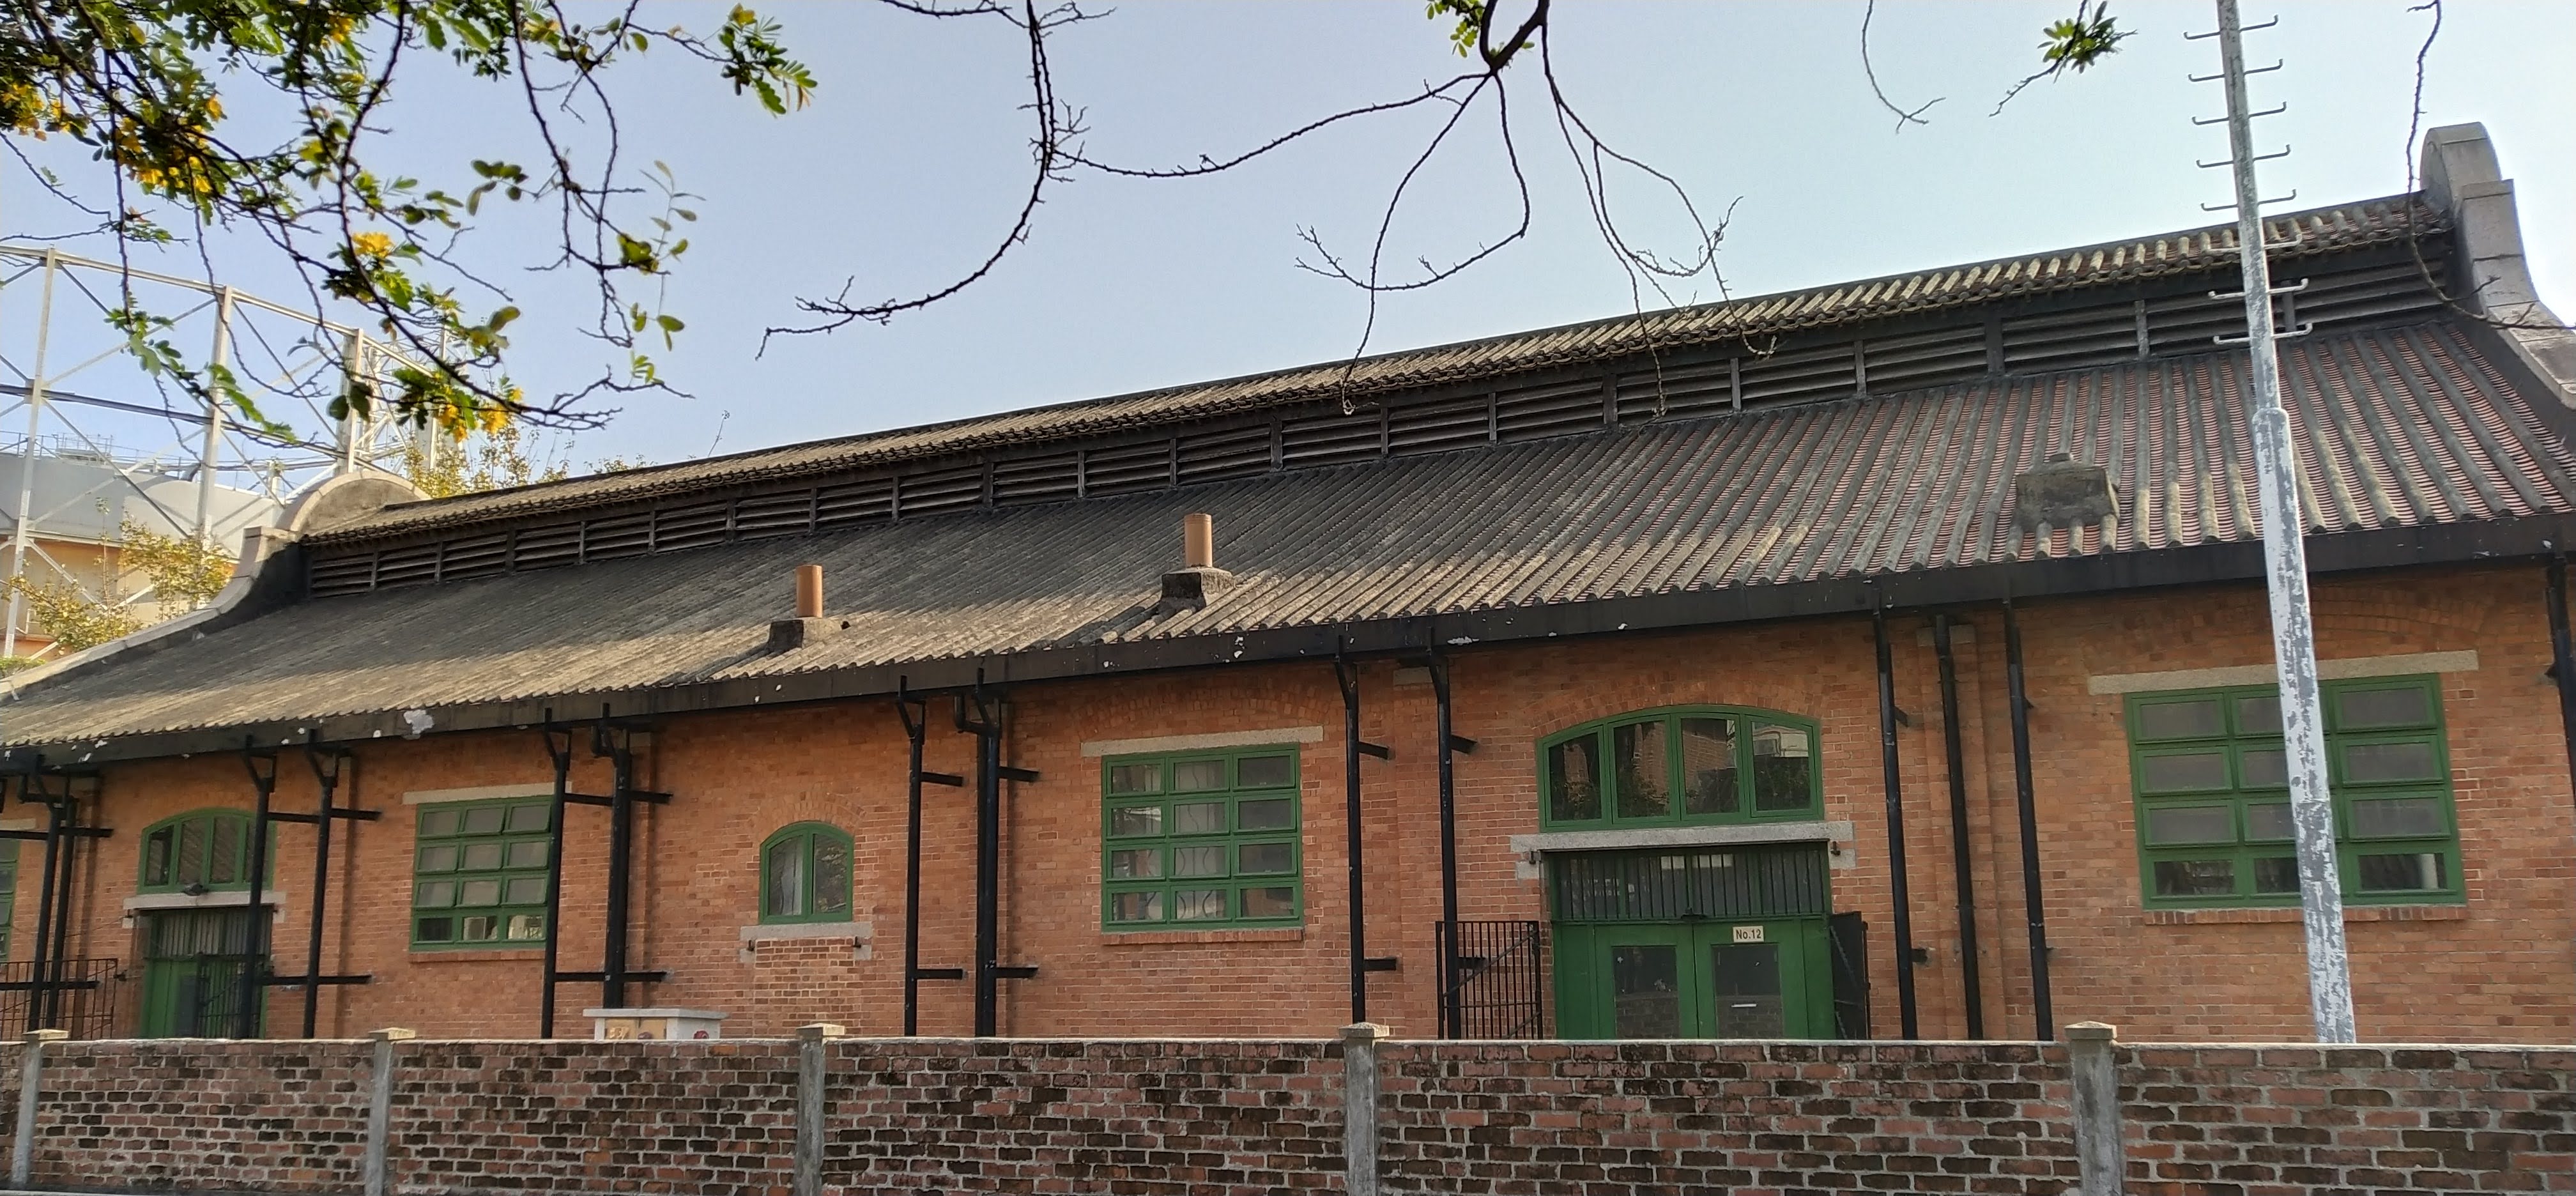 The slaughterhouse has a British style facade and Chinese style tiled roof.